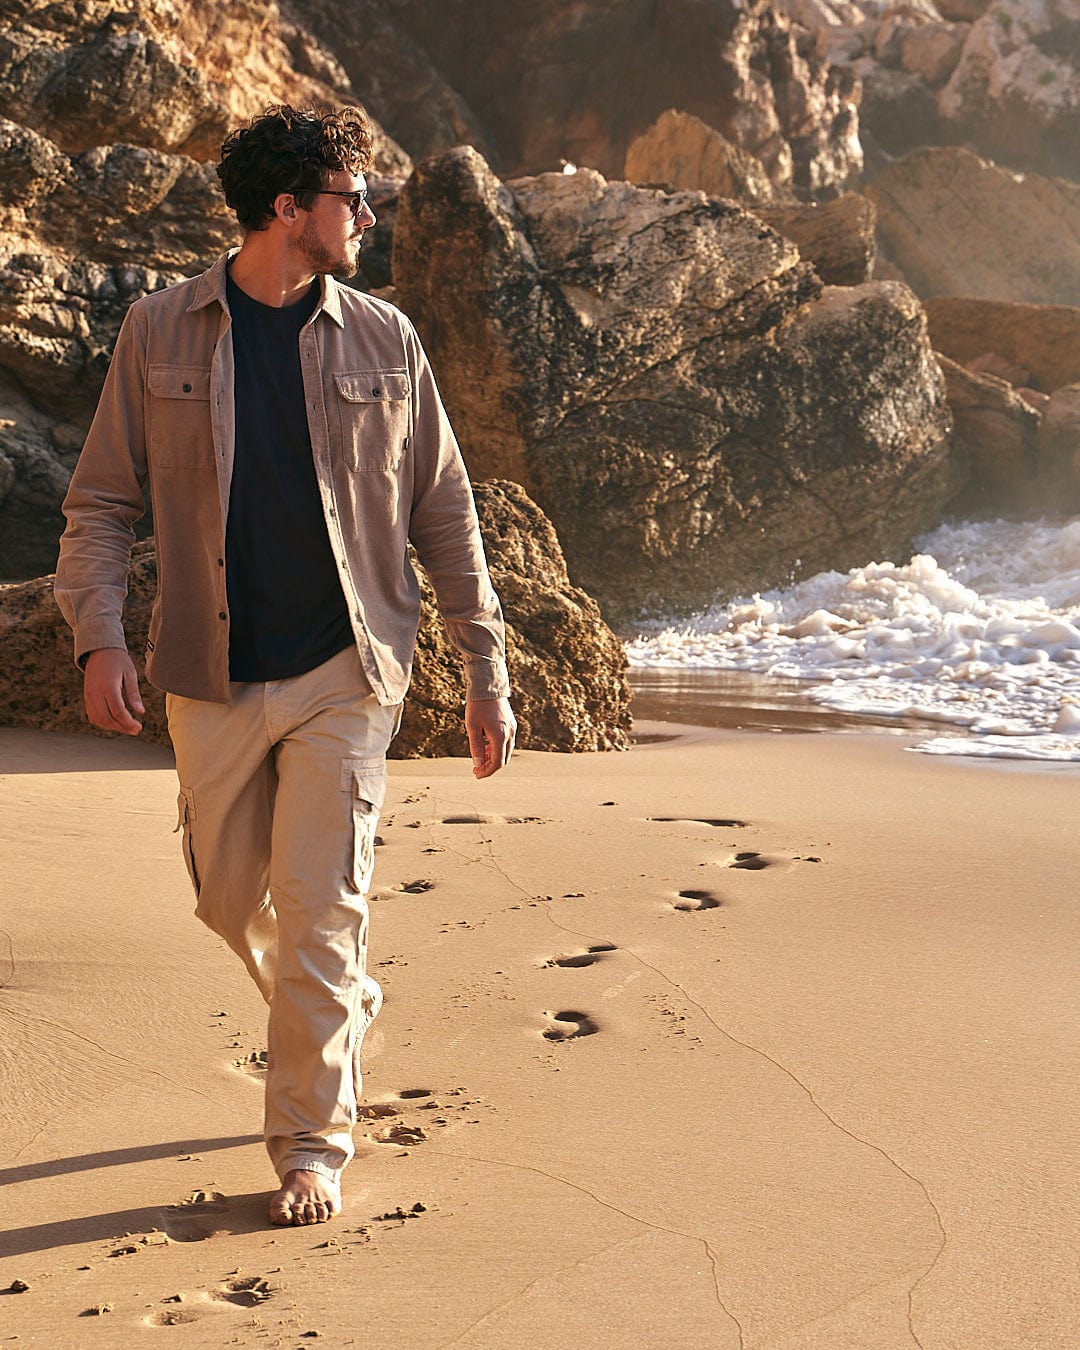 A man in Saltrock's Godrevy - Mens Cargo Trouser - Cream walking on a beach with a surfboard, enjoying an Outdoor Adventure by the sea.